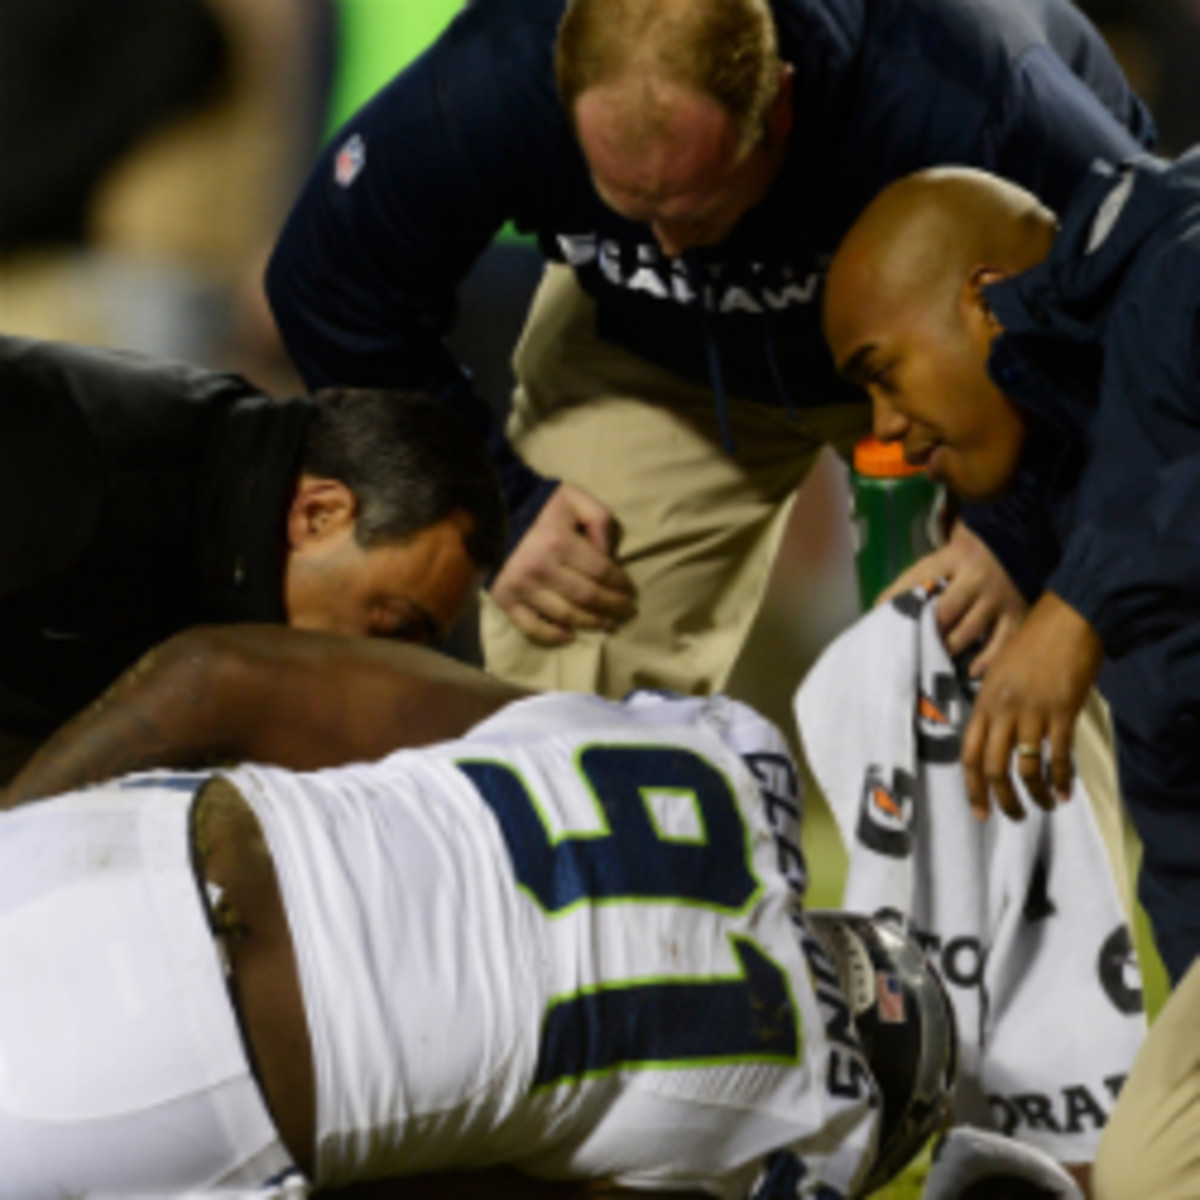 Chris Clemons tore his ACL in the Seahawks' win over the Redskins on Sunday and will miss the rest of Seattle's playoff run. (Patrick McDermott/Getty Images)